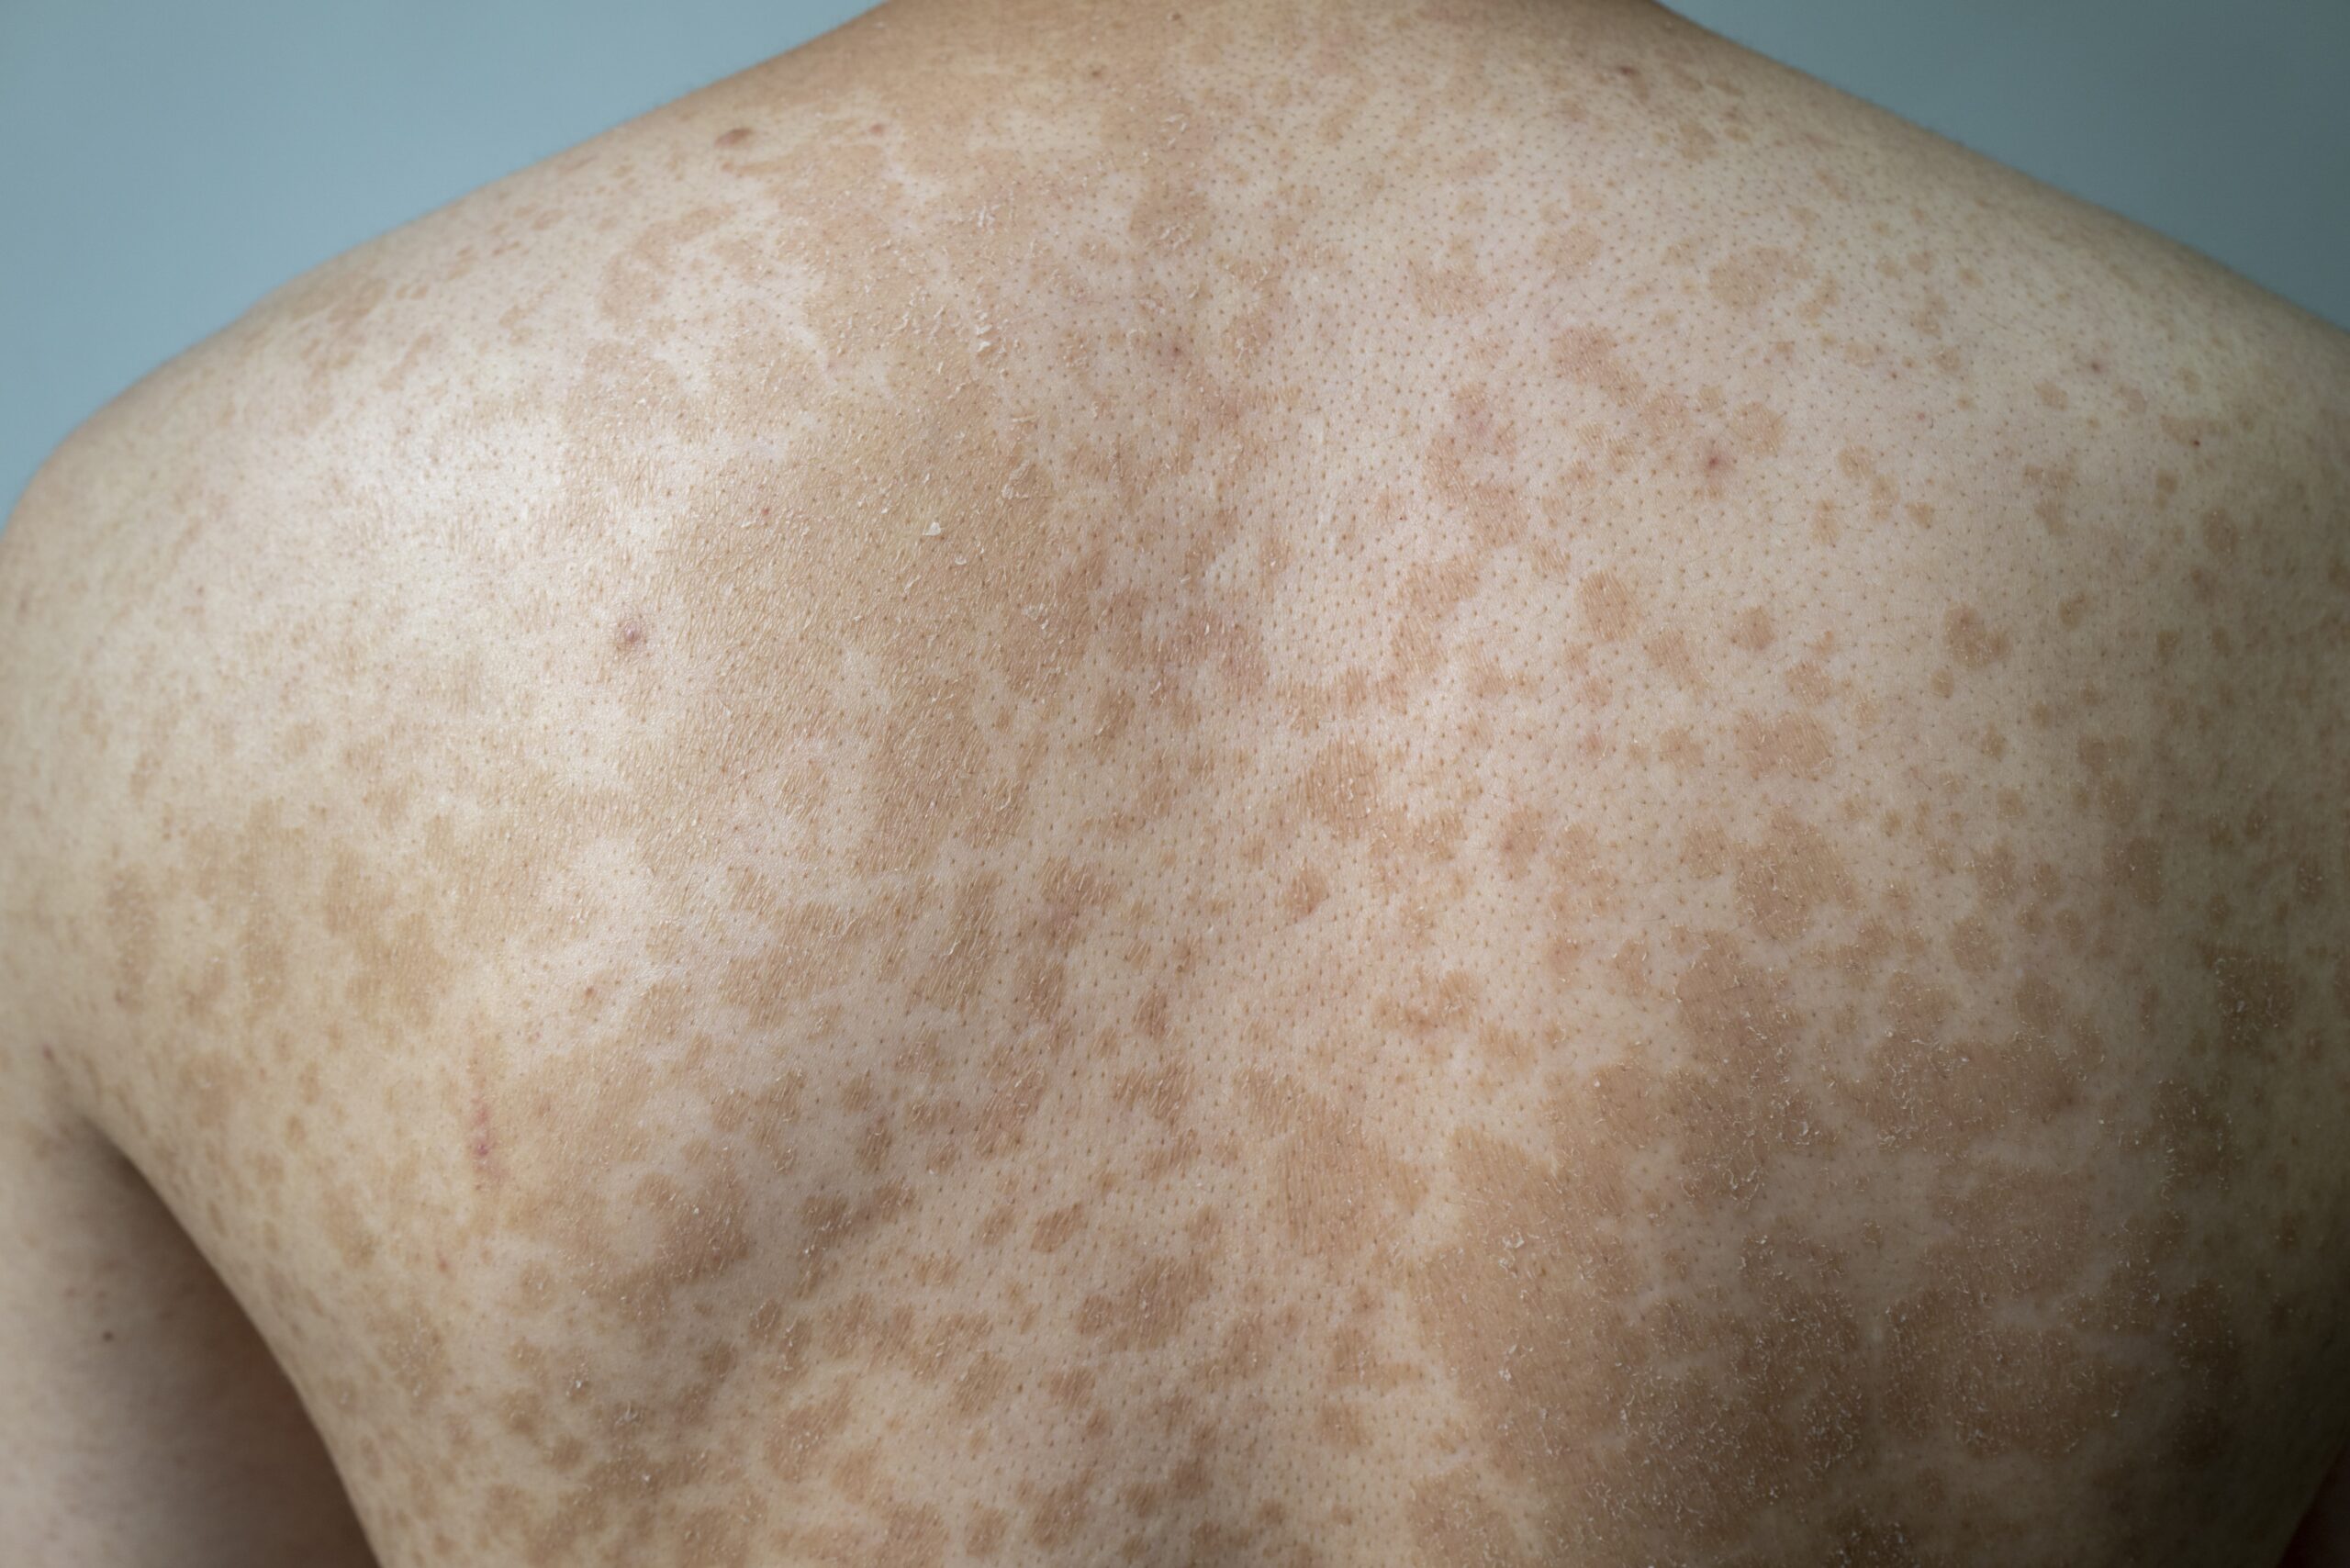 Everything You Need to Know About Tinea Versicolor & Tinea Versicolor  Treatments